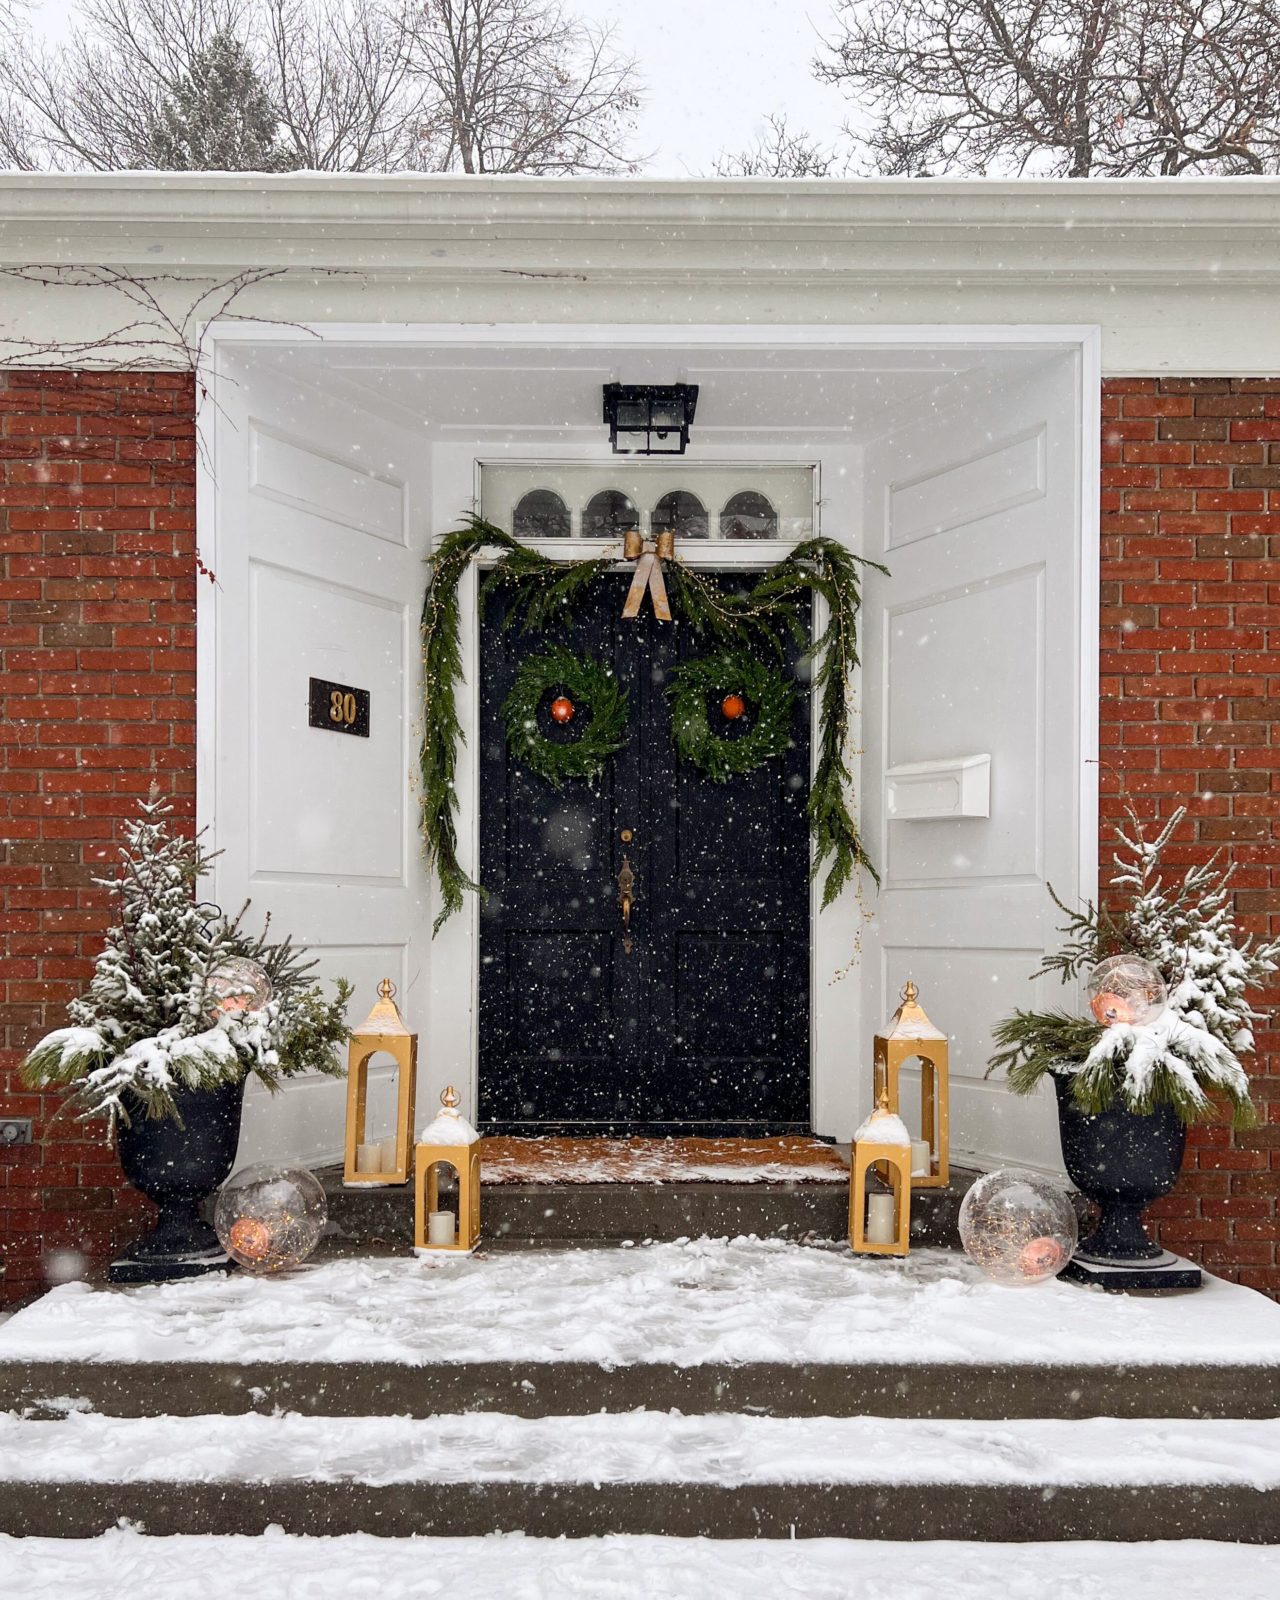 Snow falling in front of a festively decorated front door.